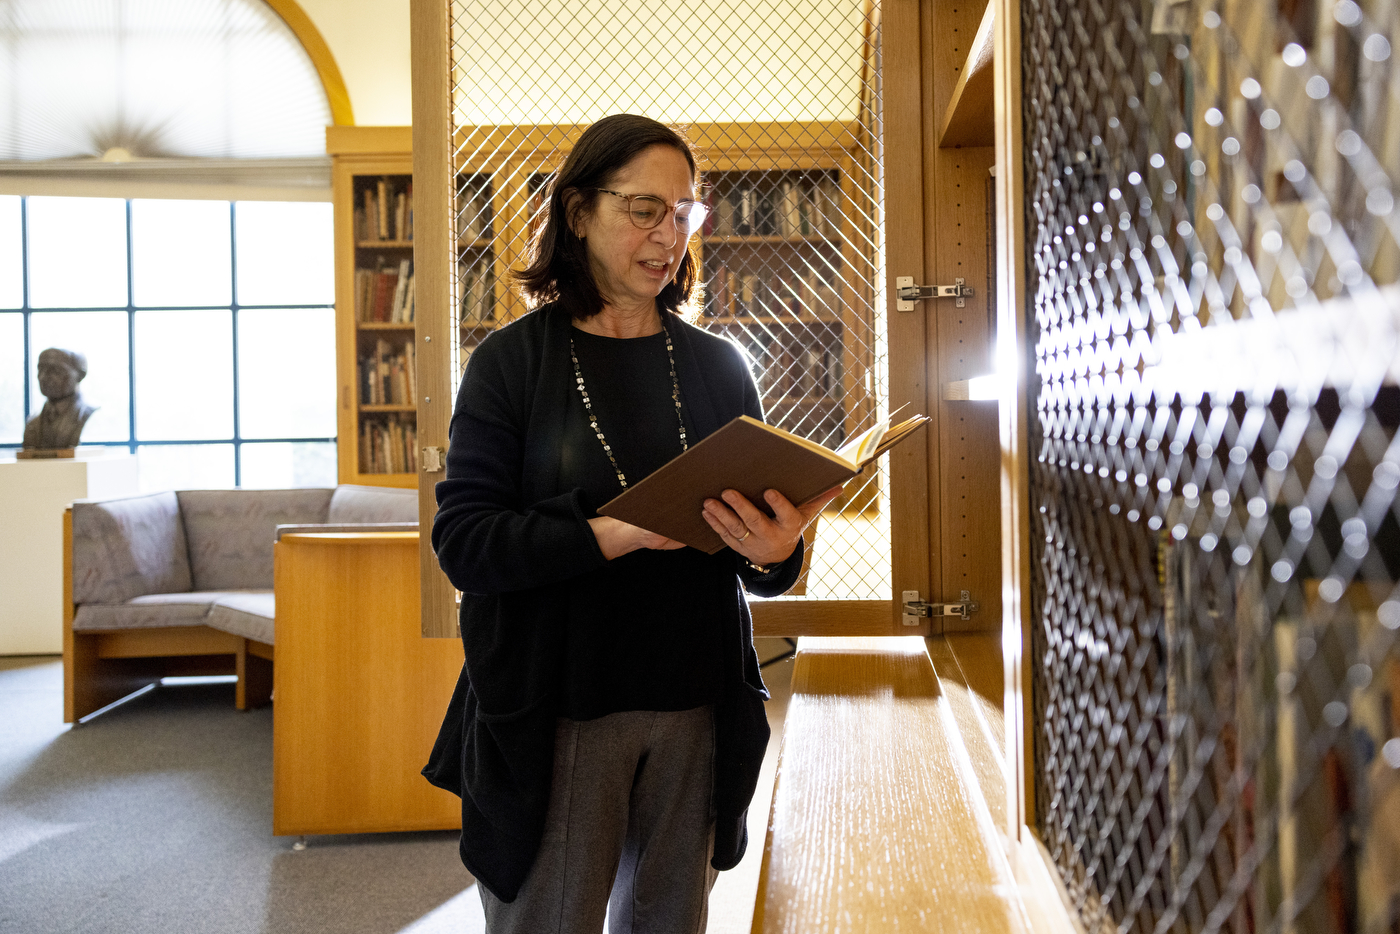 Librarian Janice Braun looks through the Special Collections within the Heller Rare Book Room at the Mills College Library.